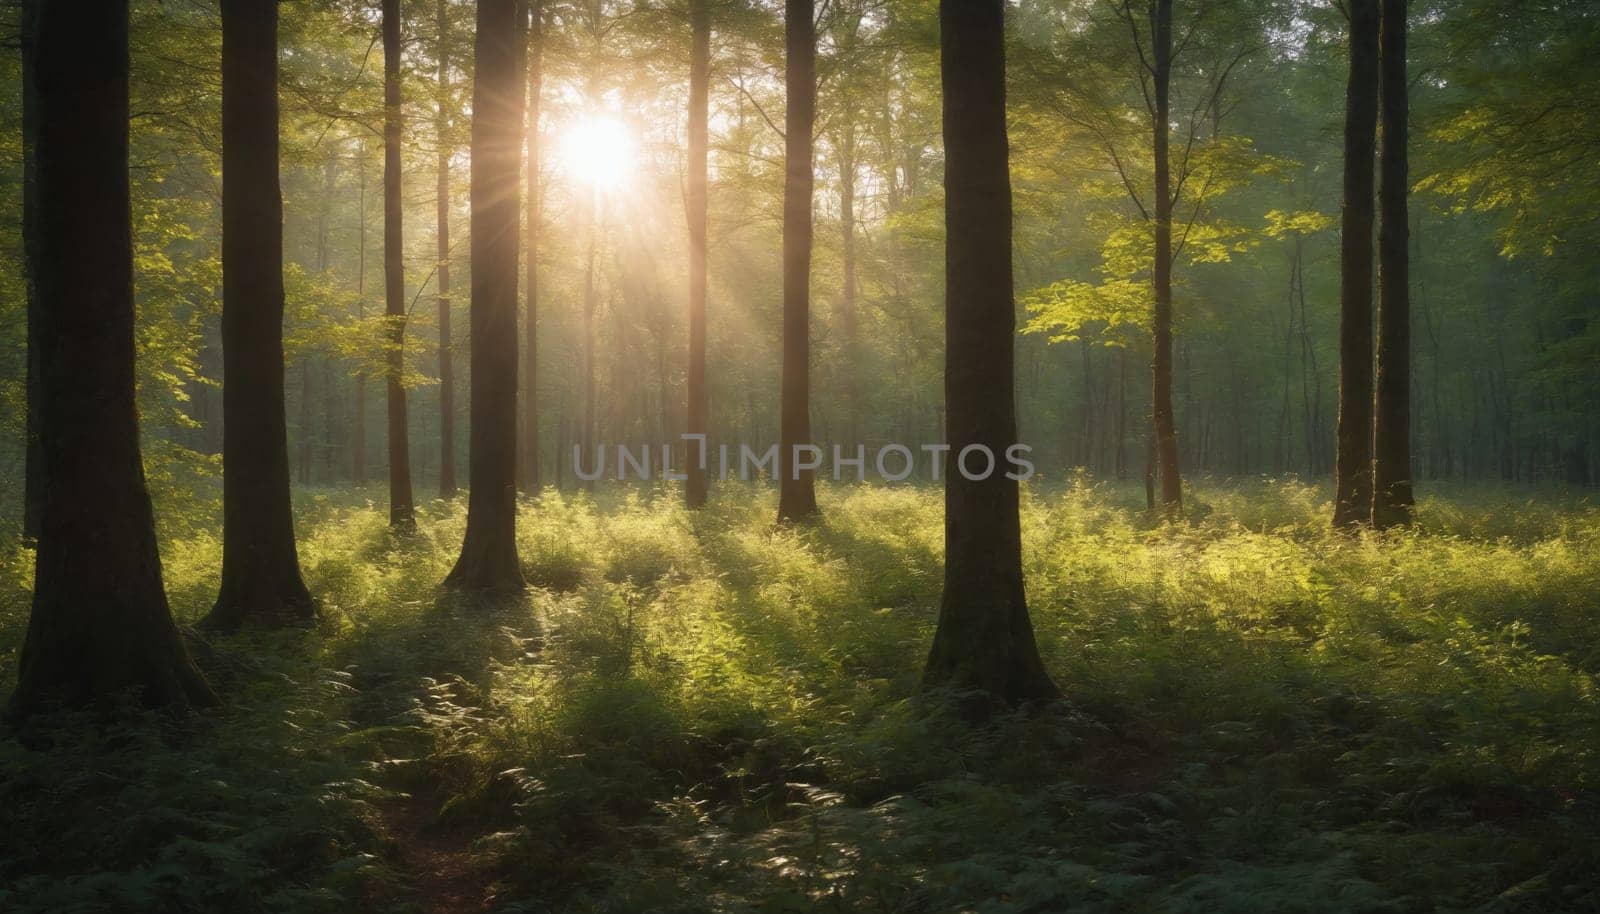 The sun's rays pierce through the thick canopy of trees, casting a warm golden glow on the forest floor, while fog gently swirls around the towering trunks.